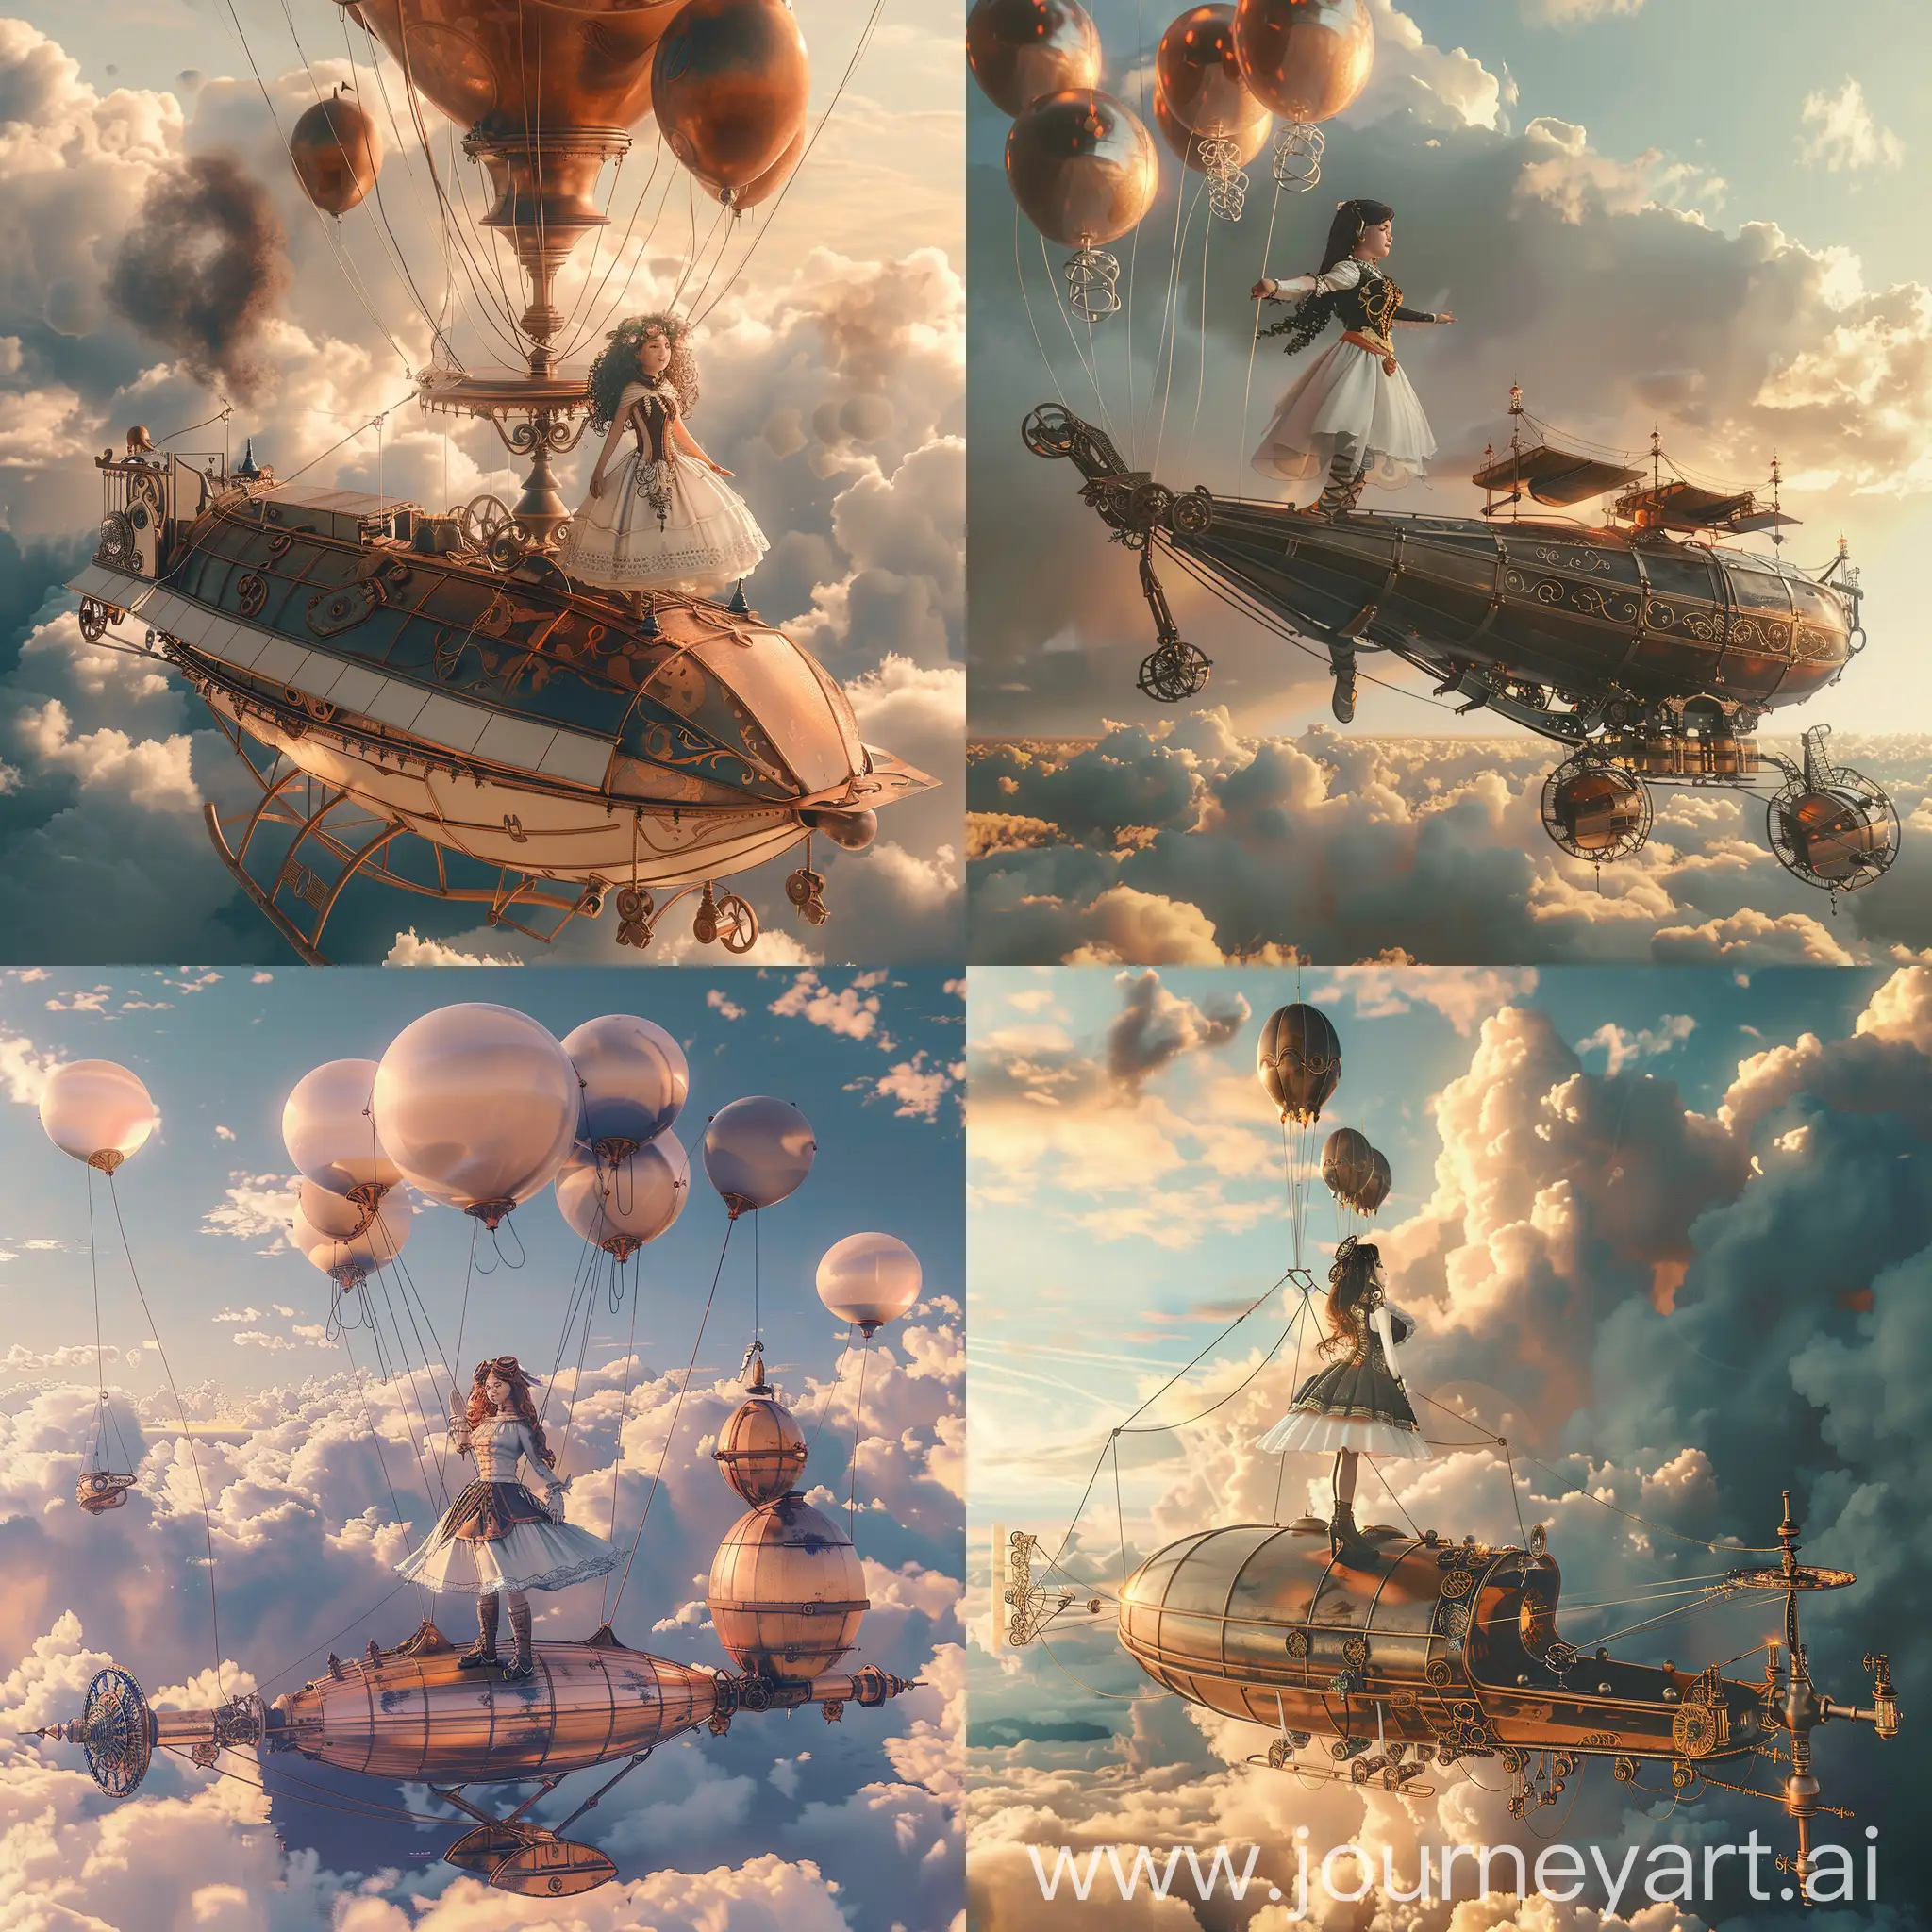 Steampunk-Girl-on-Flying-Airship-with-Balloons-in-Photorealistic-Clouds